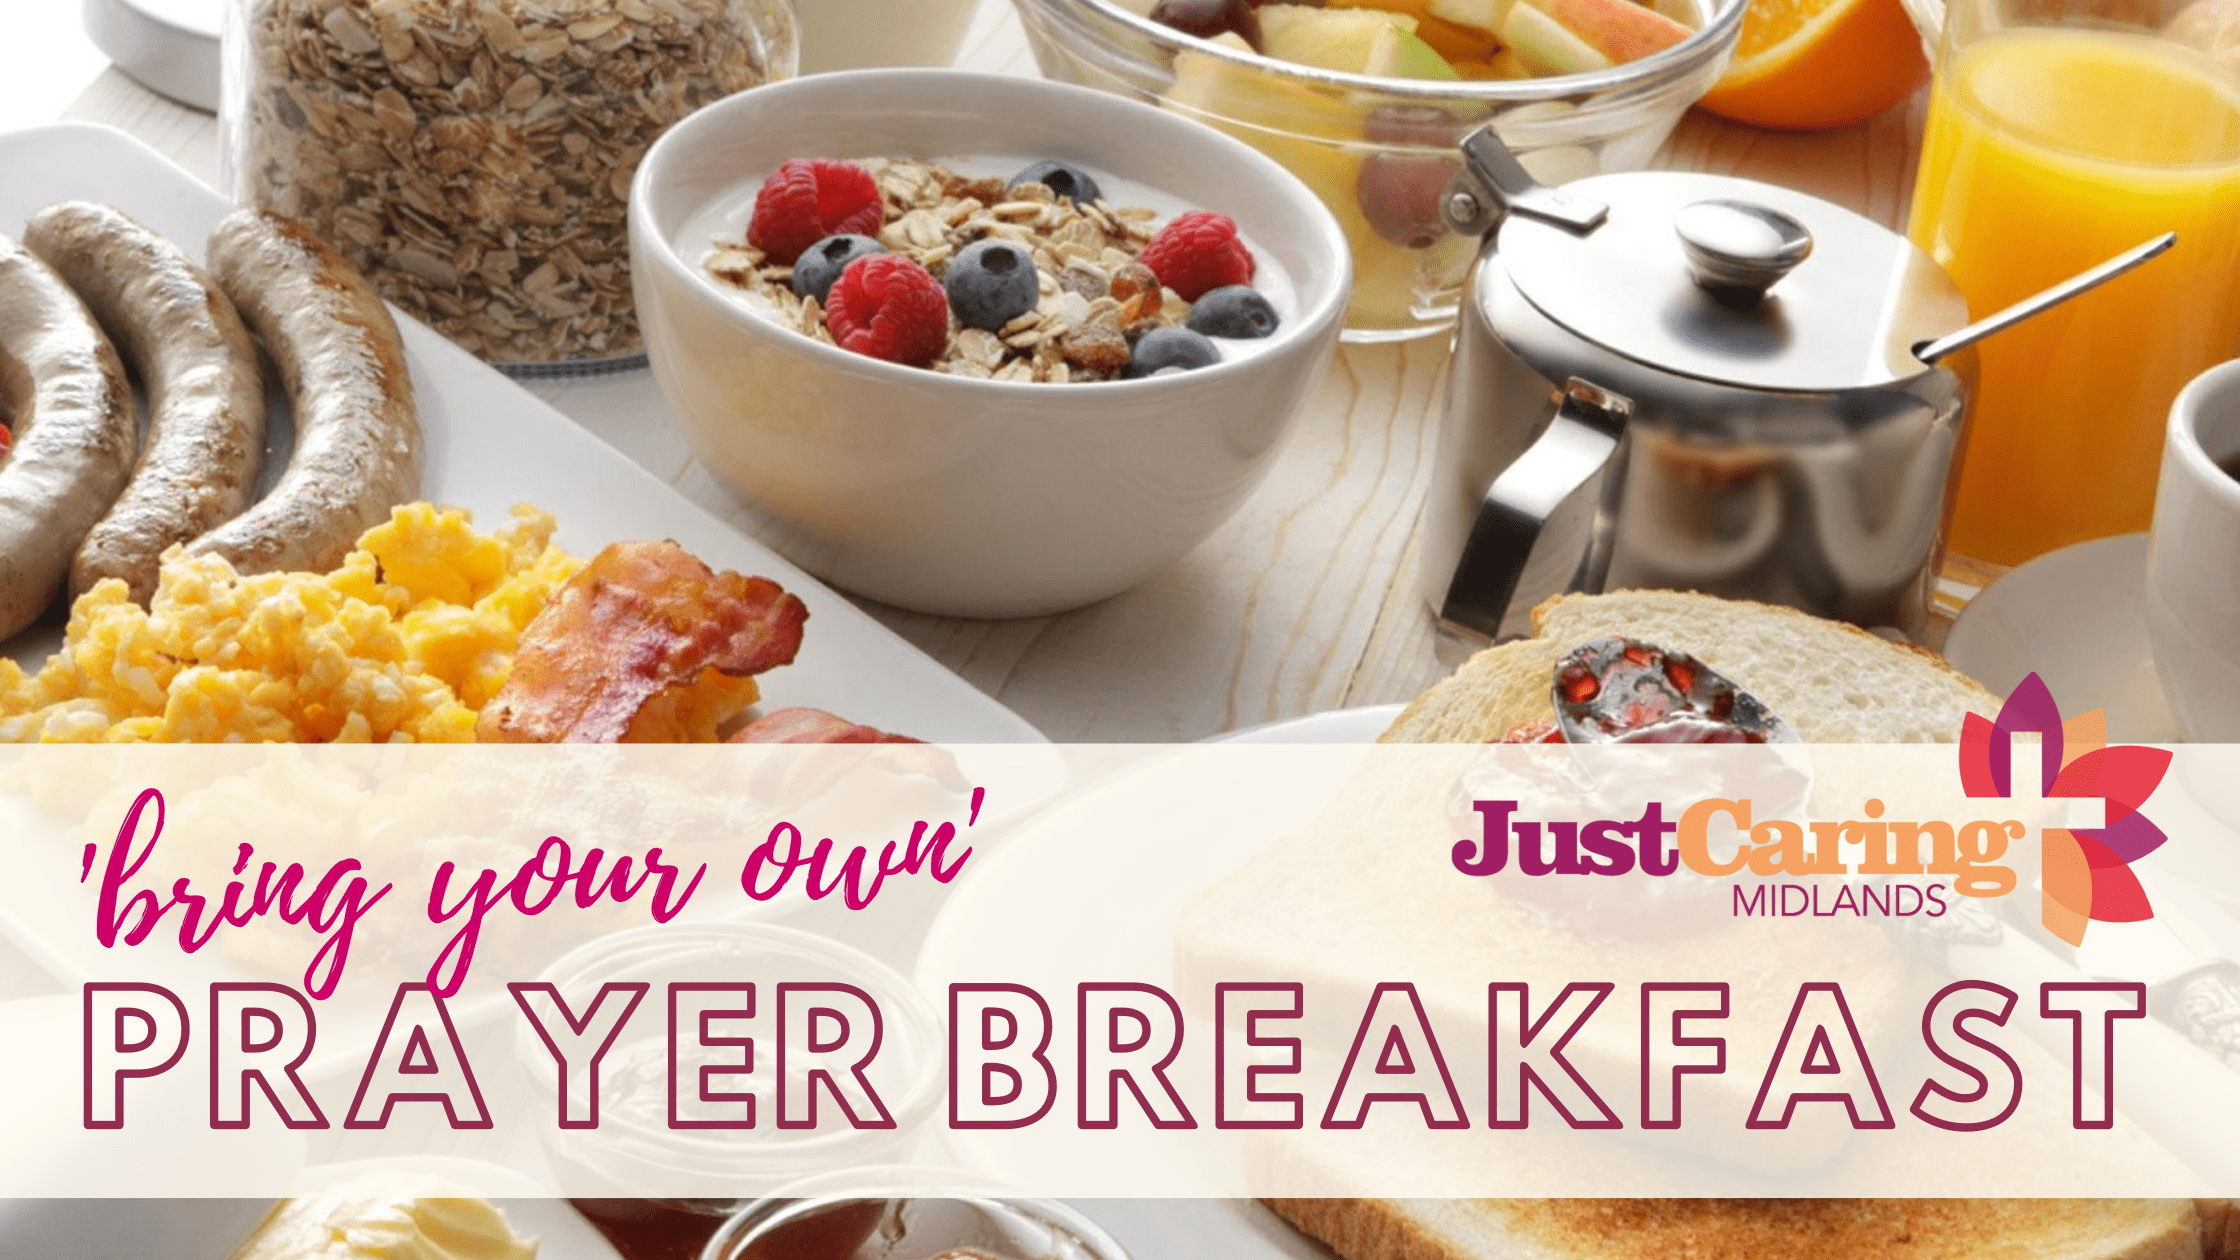 our-bring-your-own-prayer-breakfast-just-caring-midlands